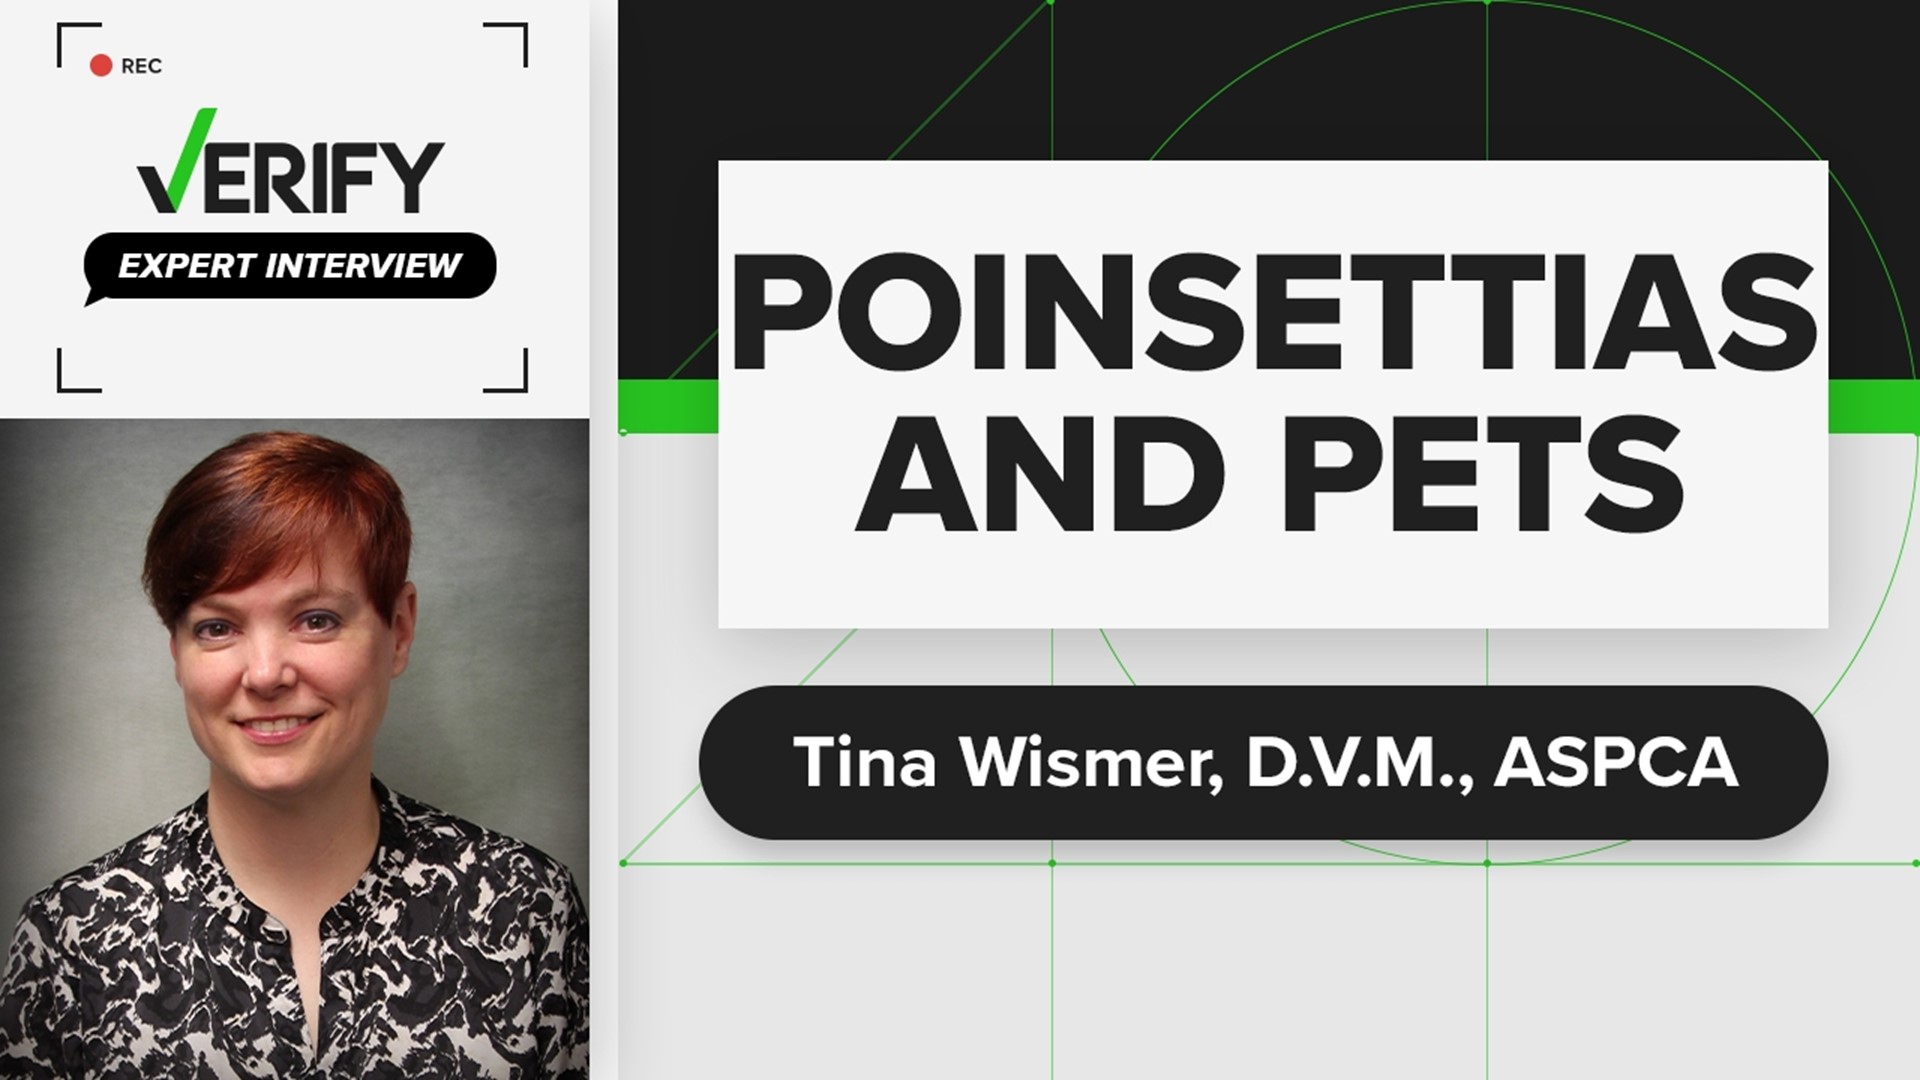 Tina Wismer, D.V.M. of the ASPCA breaks down whether poinsettias and mistletoe are toxic to household pets and what to do if one of your pets eats them.